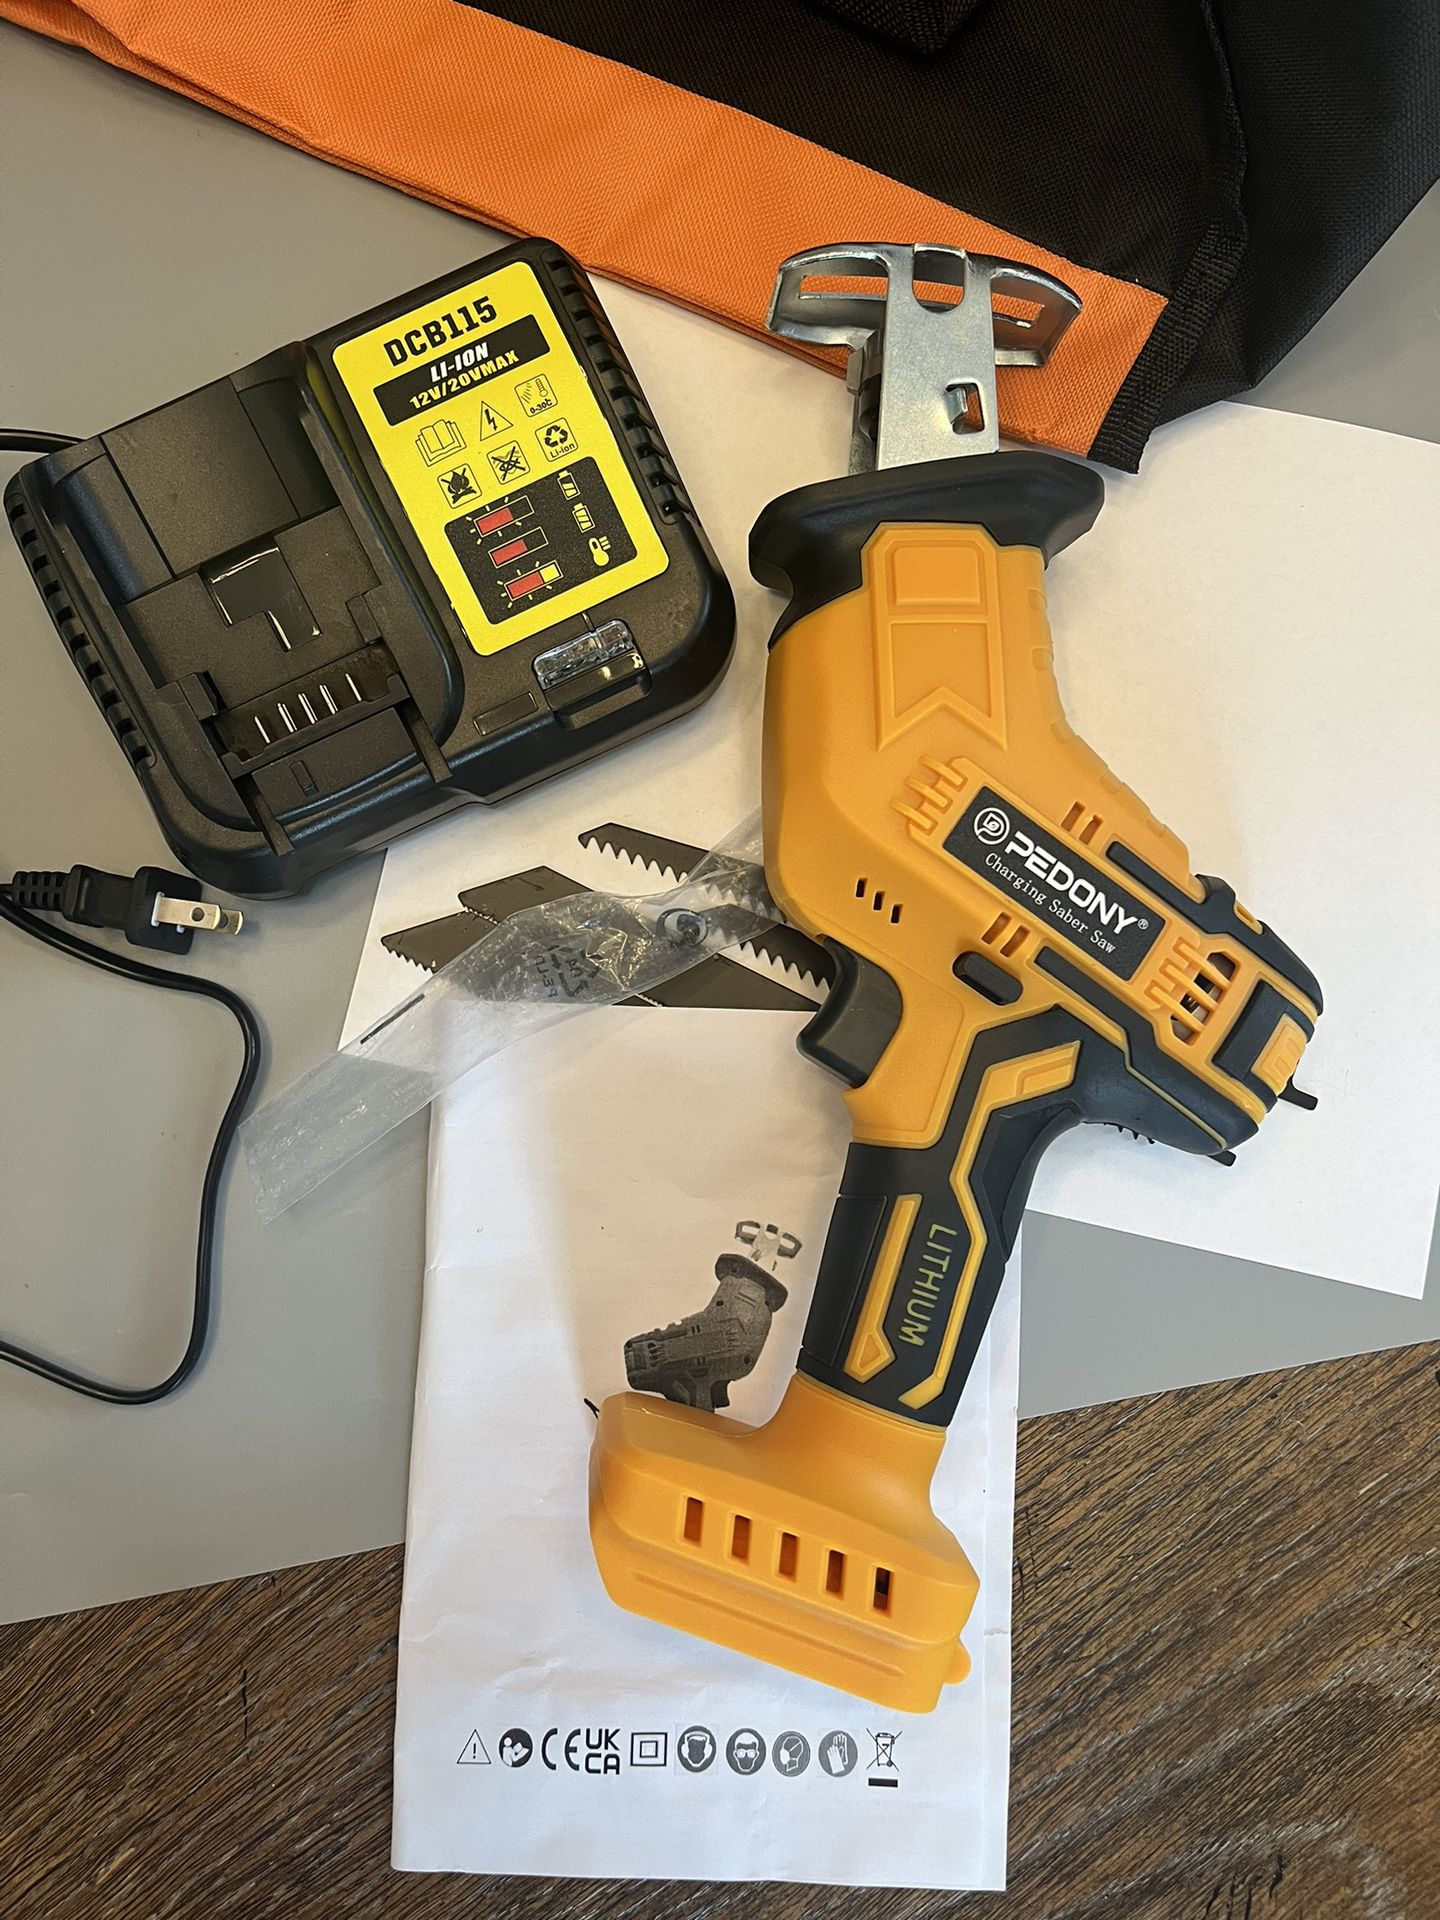 PEDONY Cordless Reciprocating Saw for Dewalt 20V Battery. ✅BRAND NEW✅ Battery Not Included• Comes With Charger, 4 Blades And Carrying Bag.